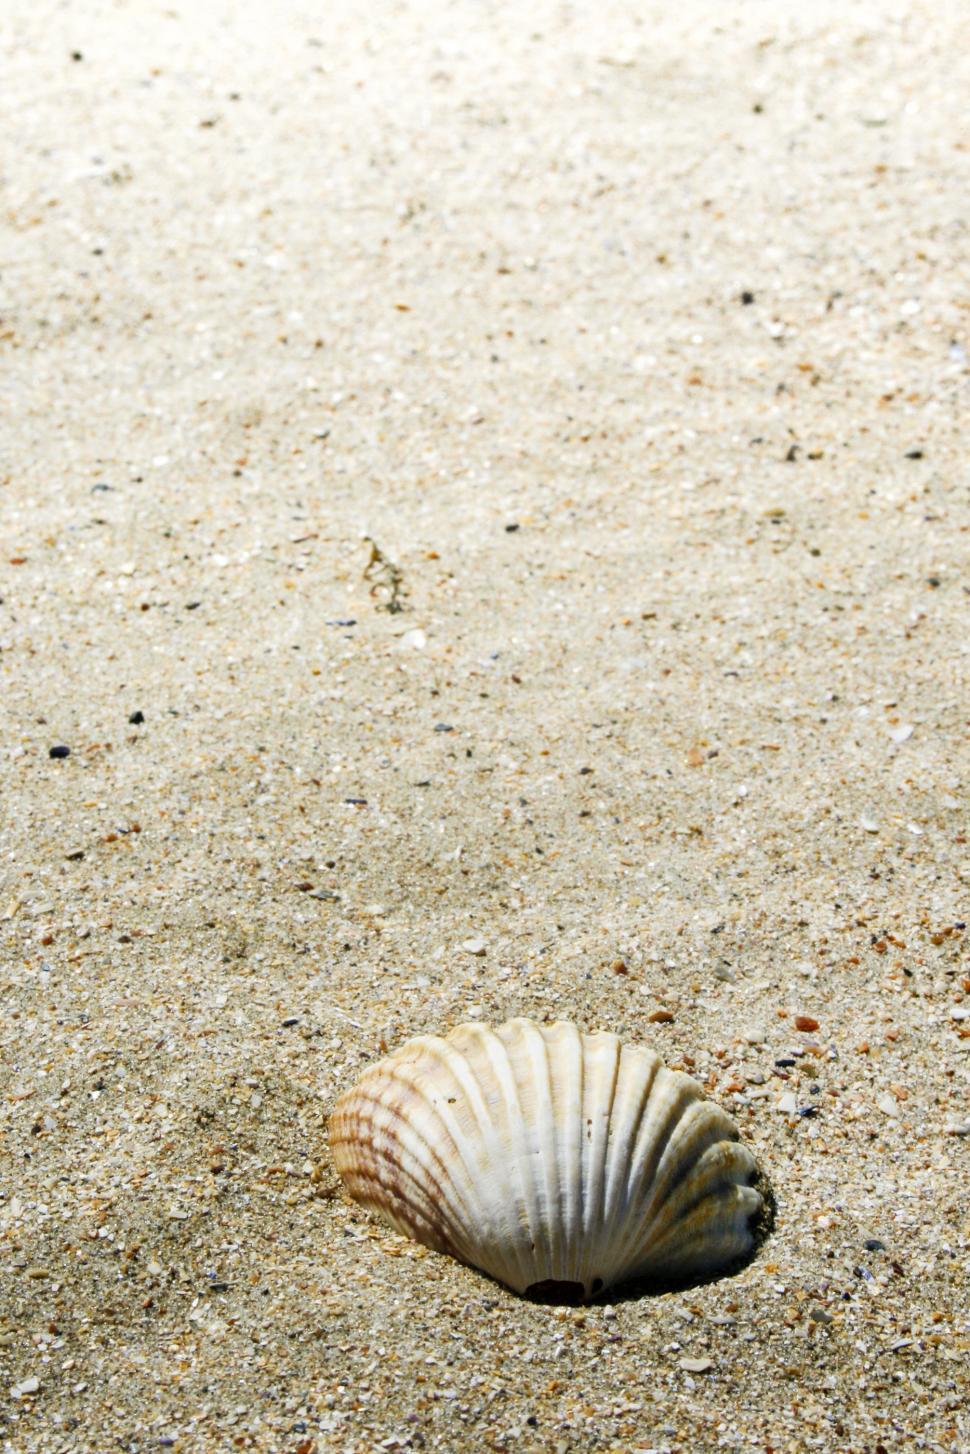 Free Image of shell on beach 